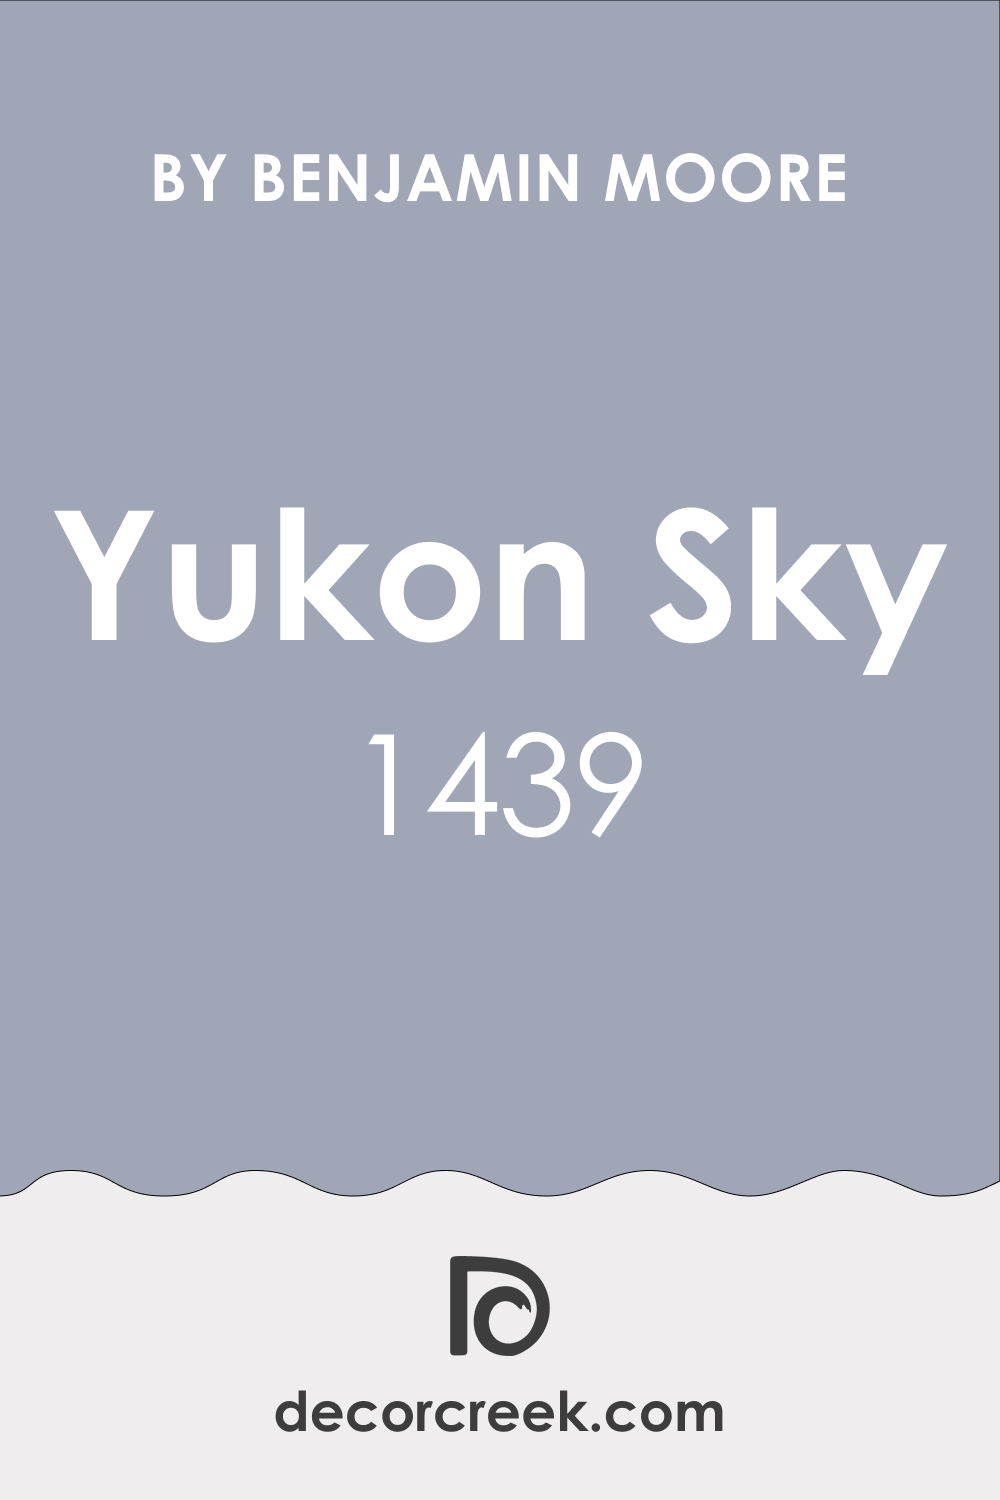 What Color Is Yukon Sky 1439?